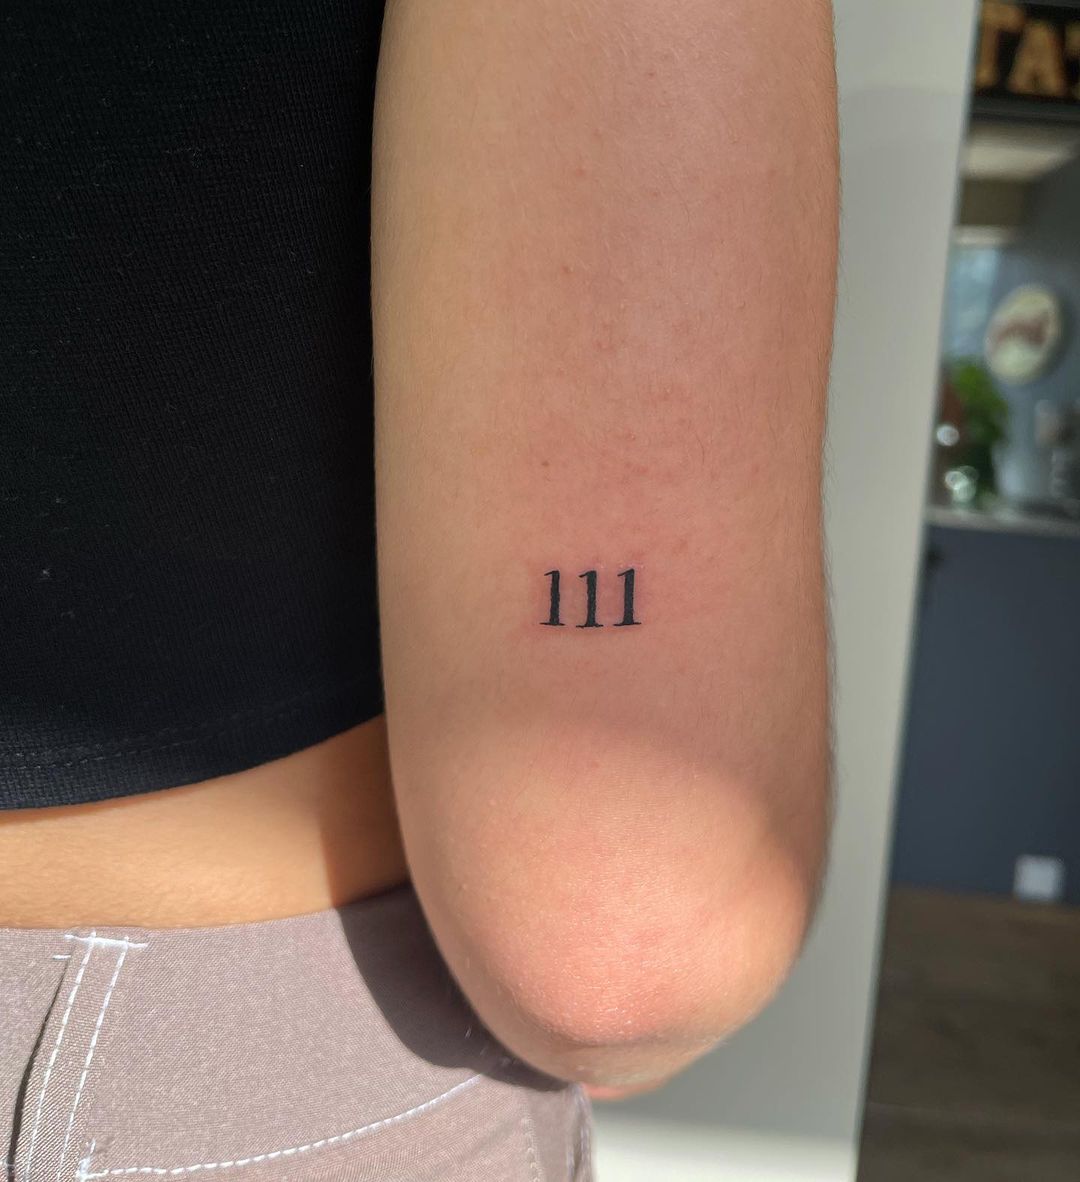 111 tattoo in the back of the arm of a white woman